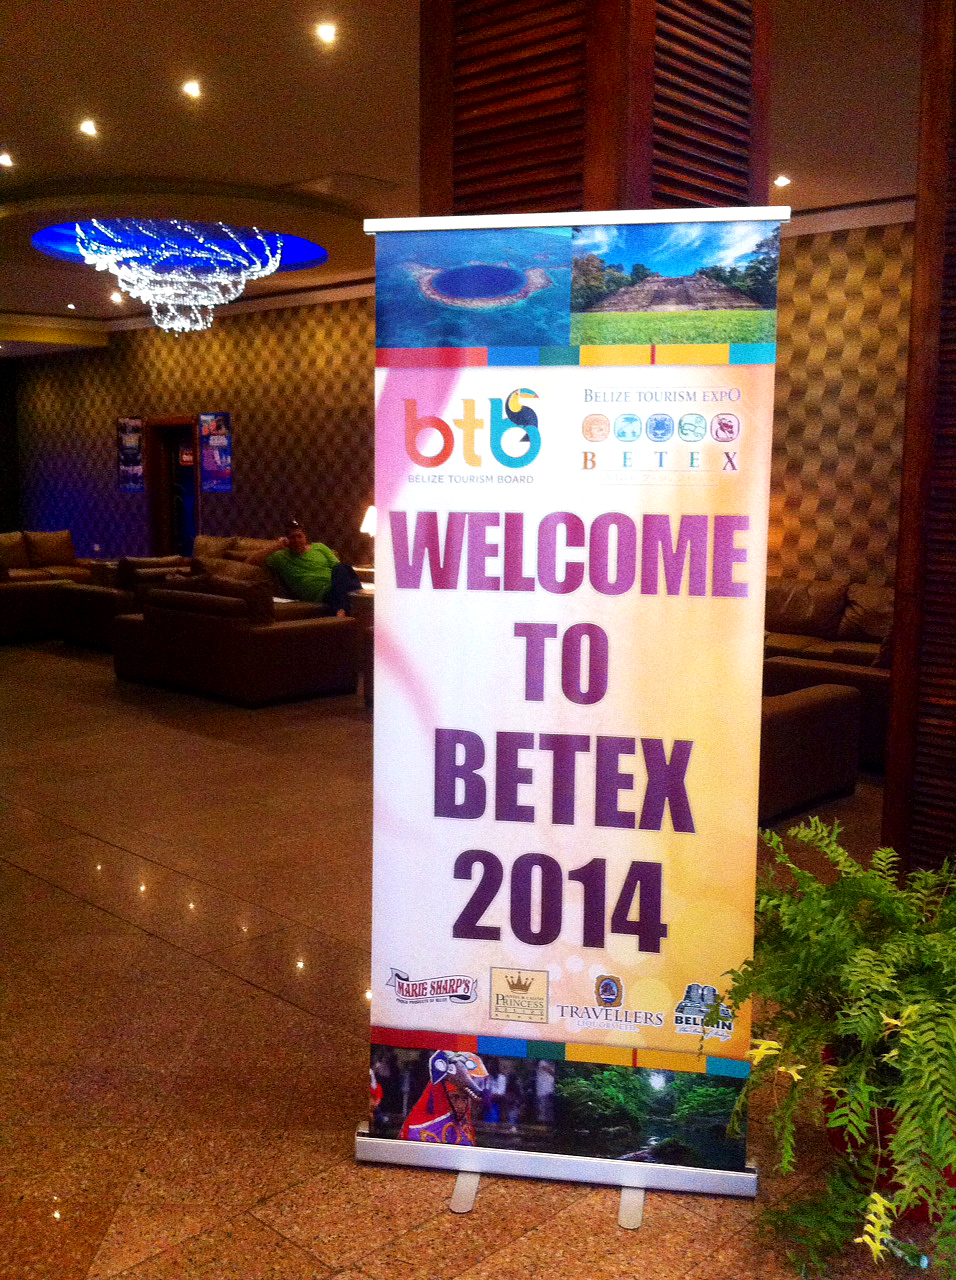 Belize Tourism Expo BETEX Reflects Eco-Tourism Growth